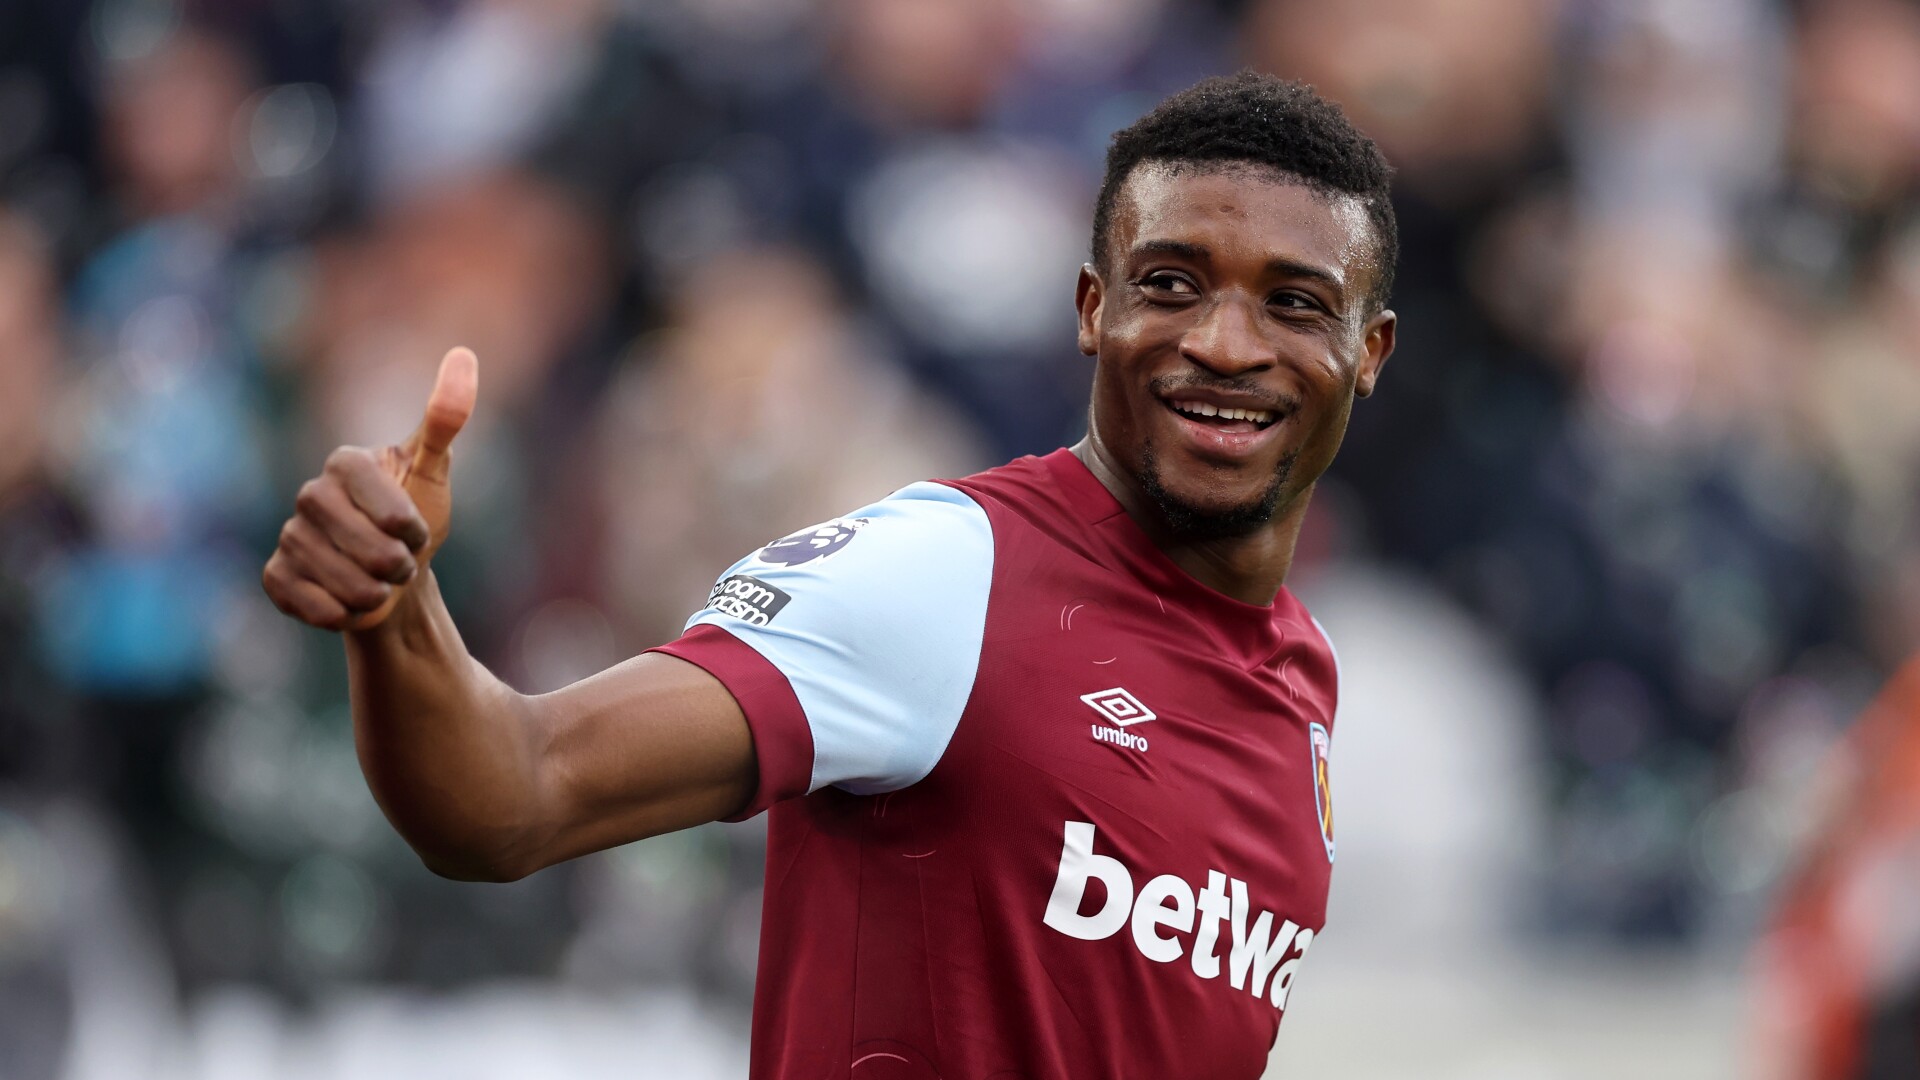 how to, west ham vs crystal palace, live! kudus, edouard trade goals - score, live updates, how to watch, videos